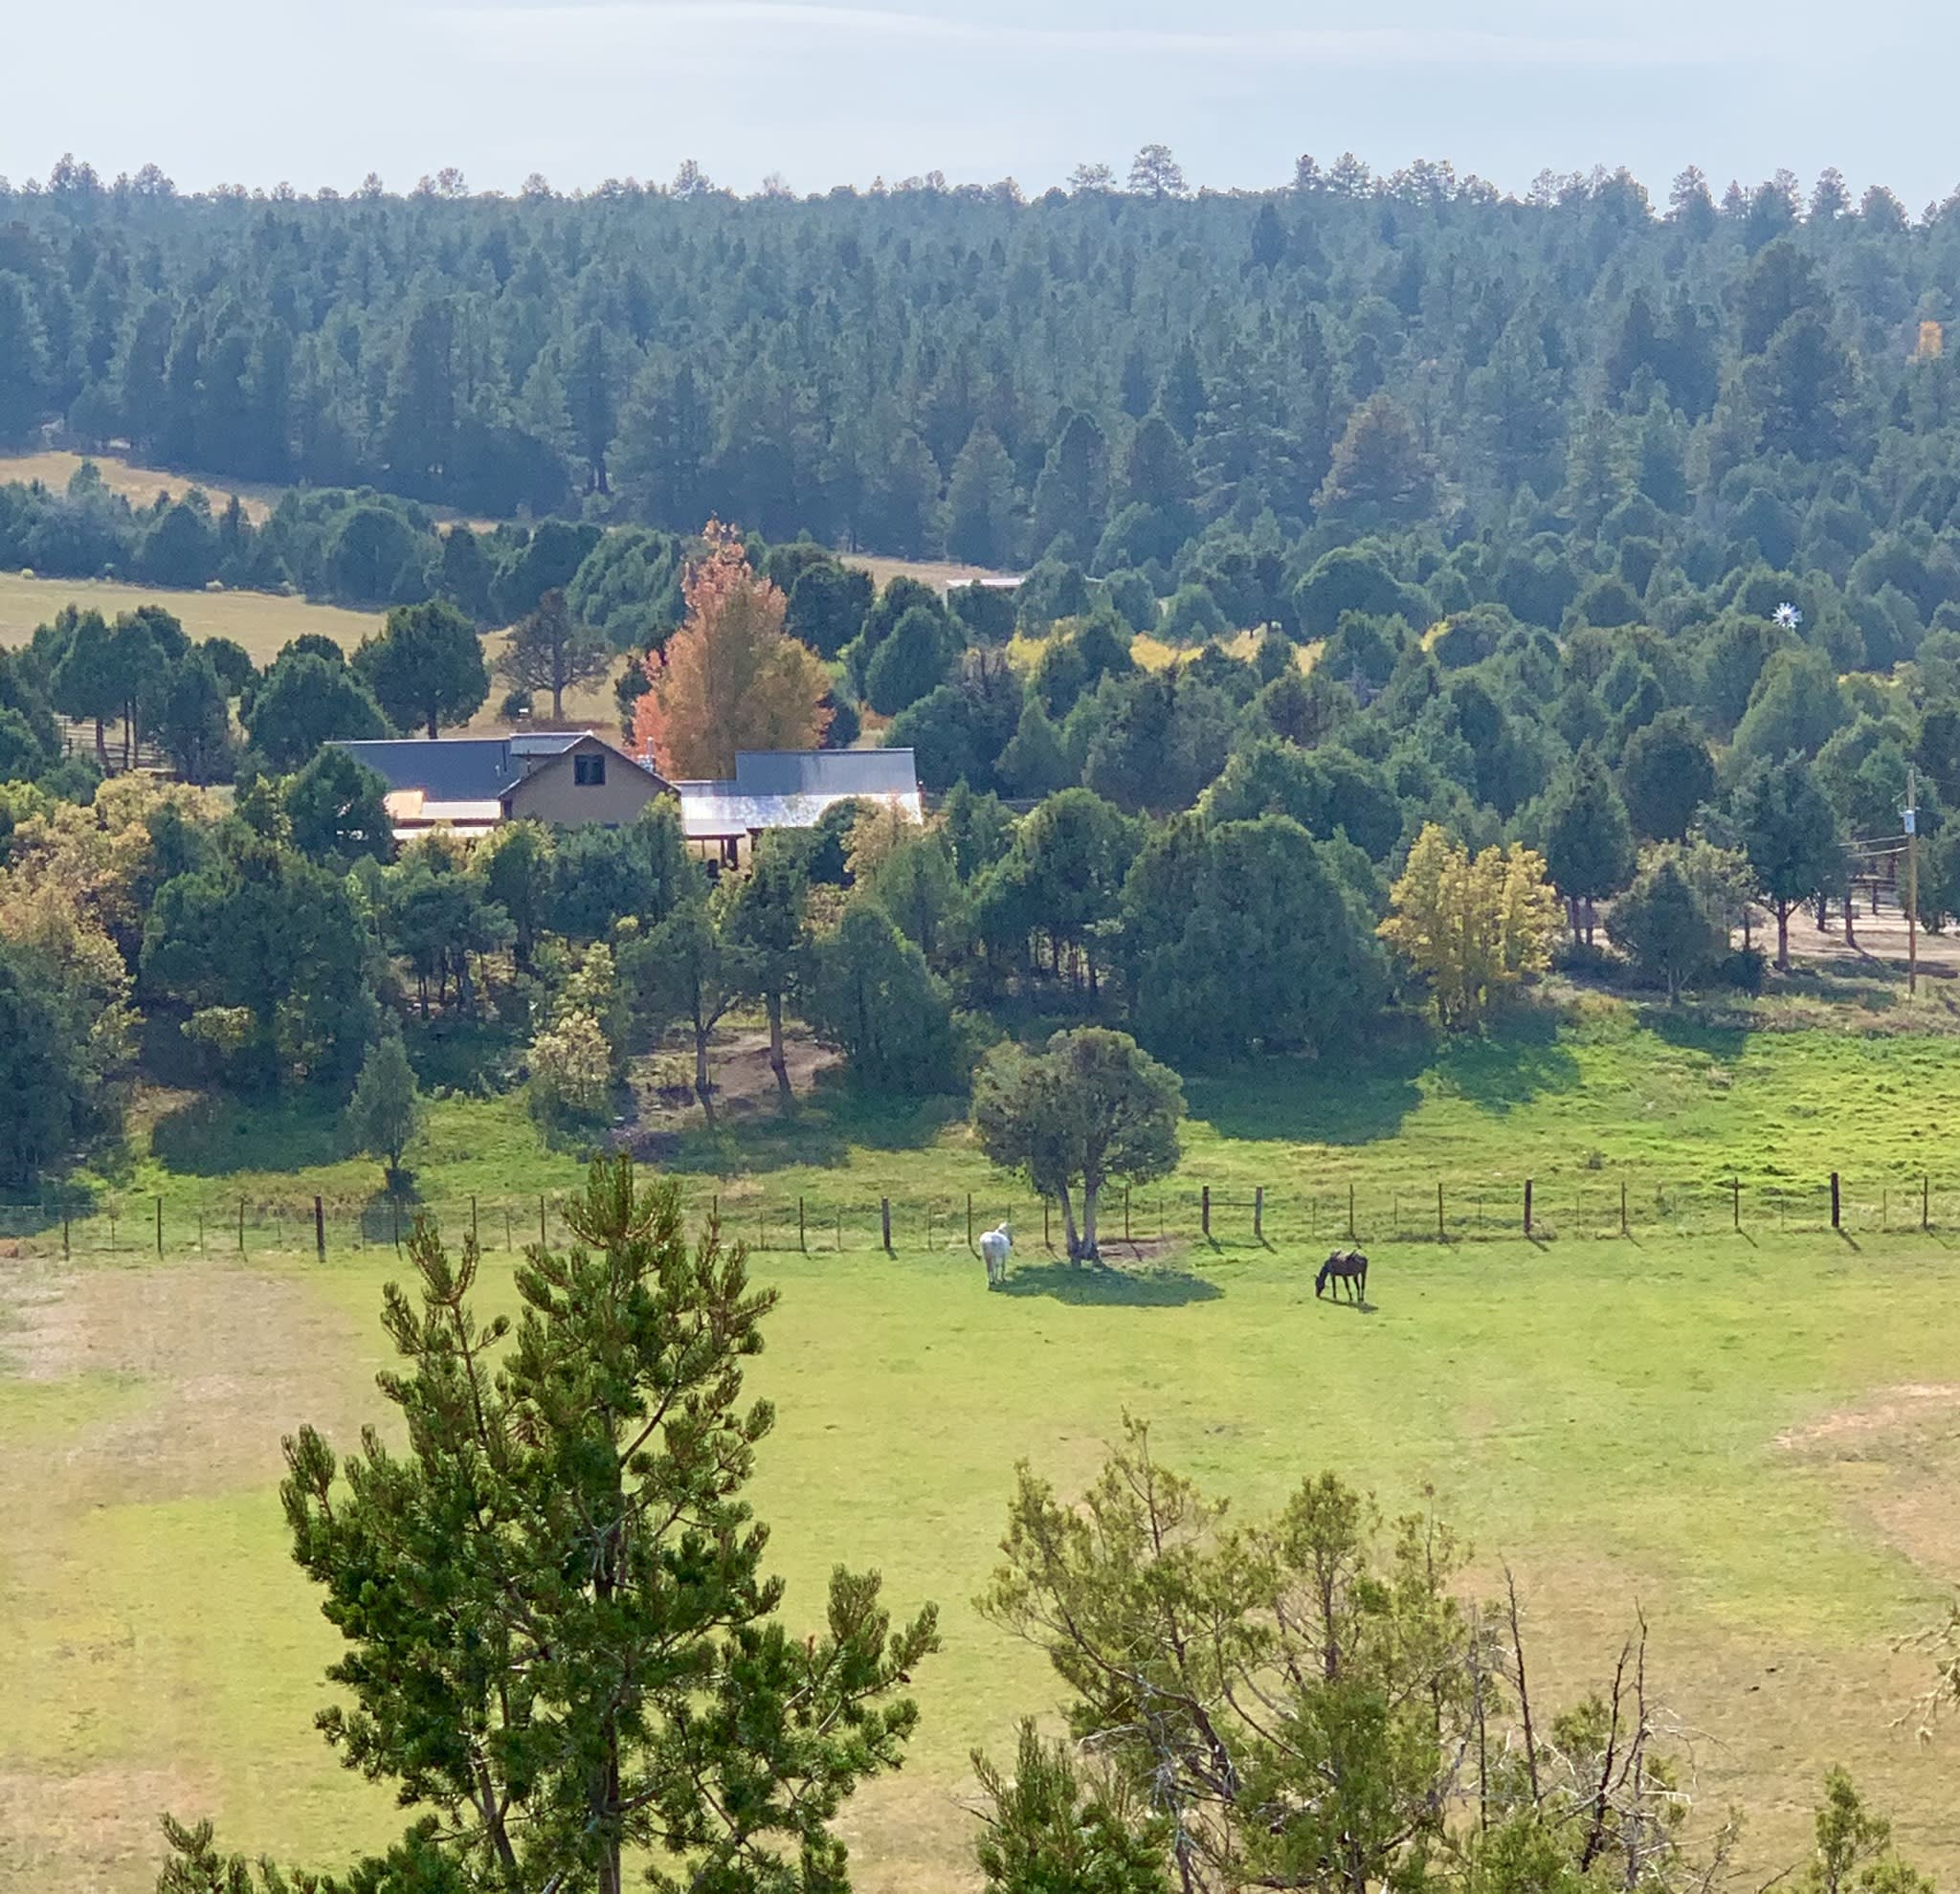 View of the house and horses in the field from Lower Llano Road in the fall.